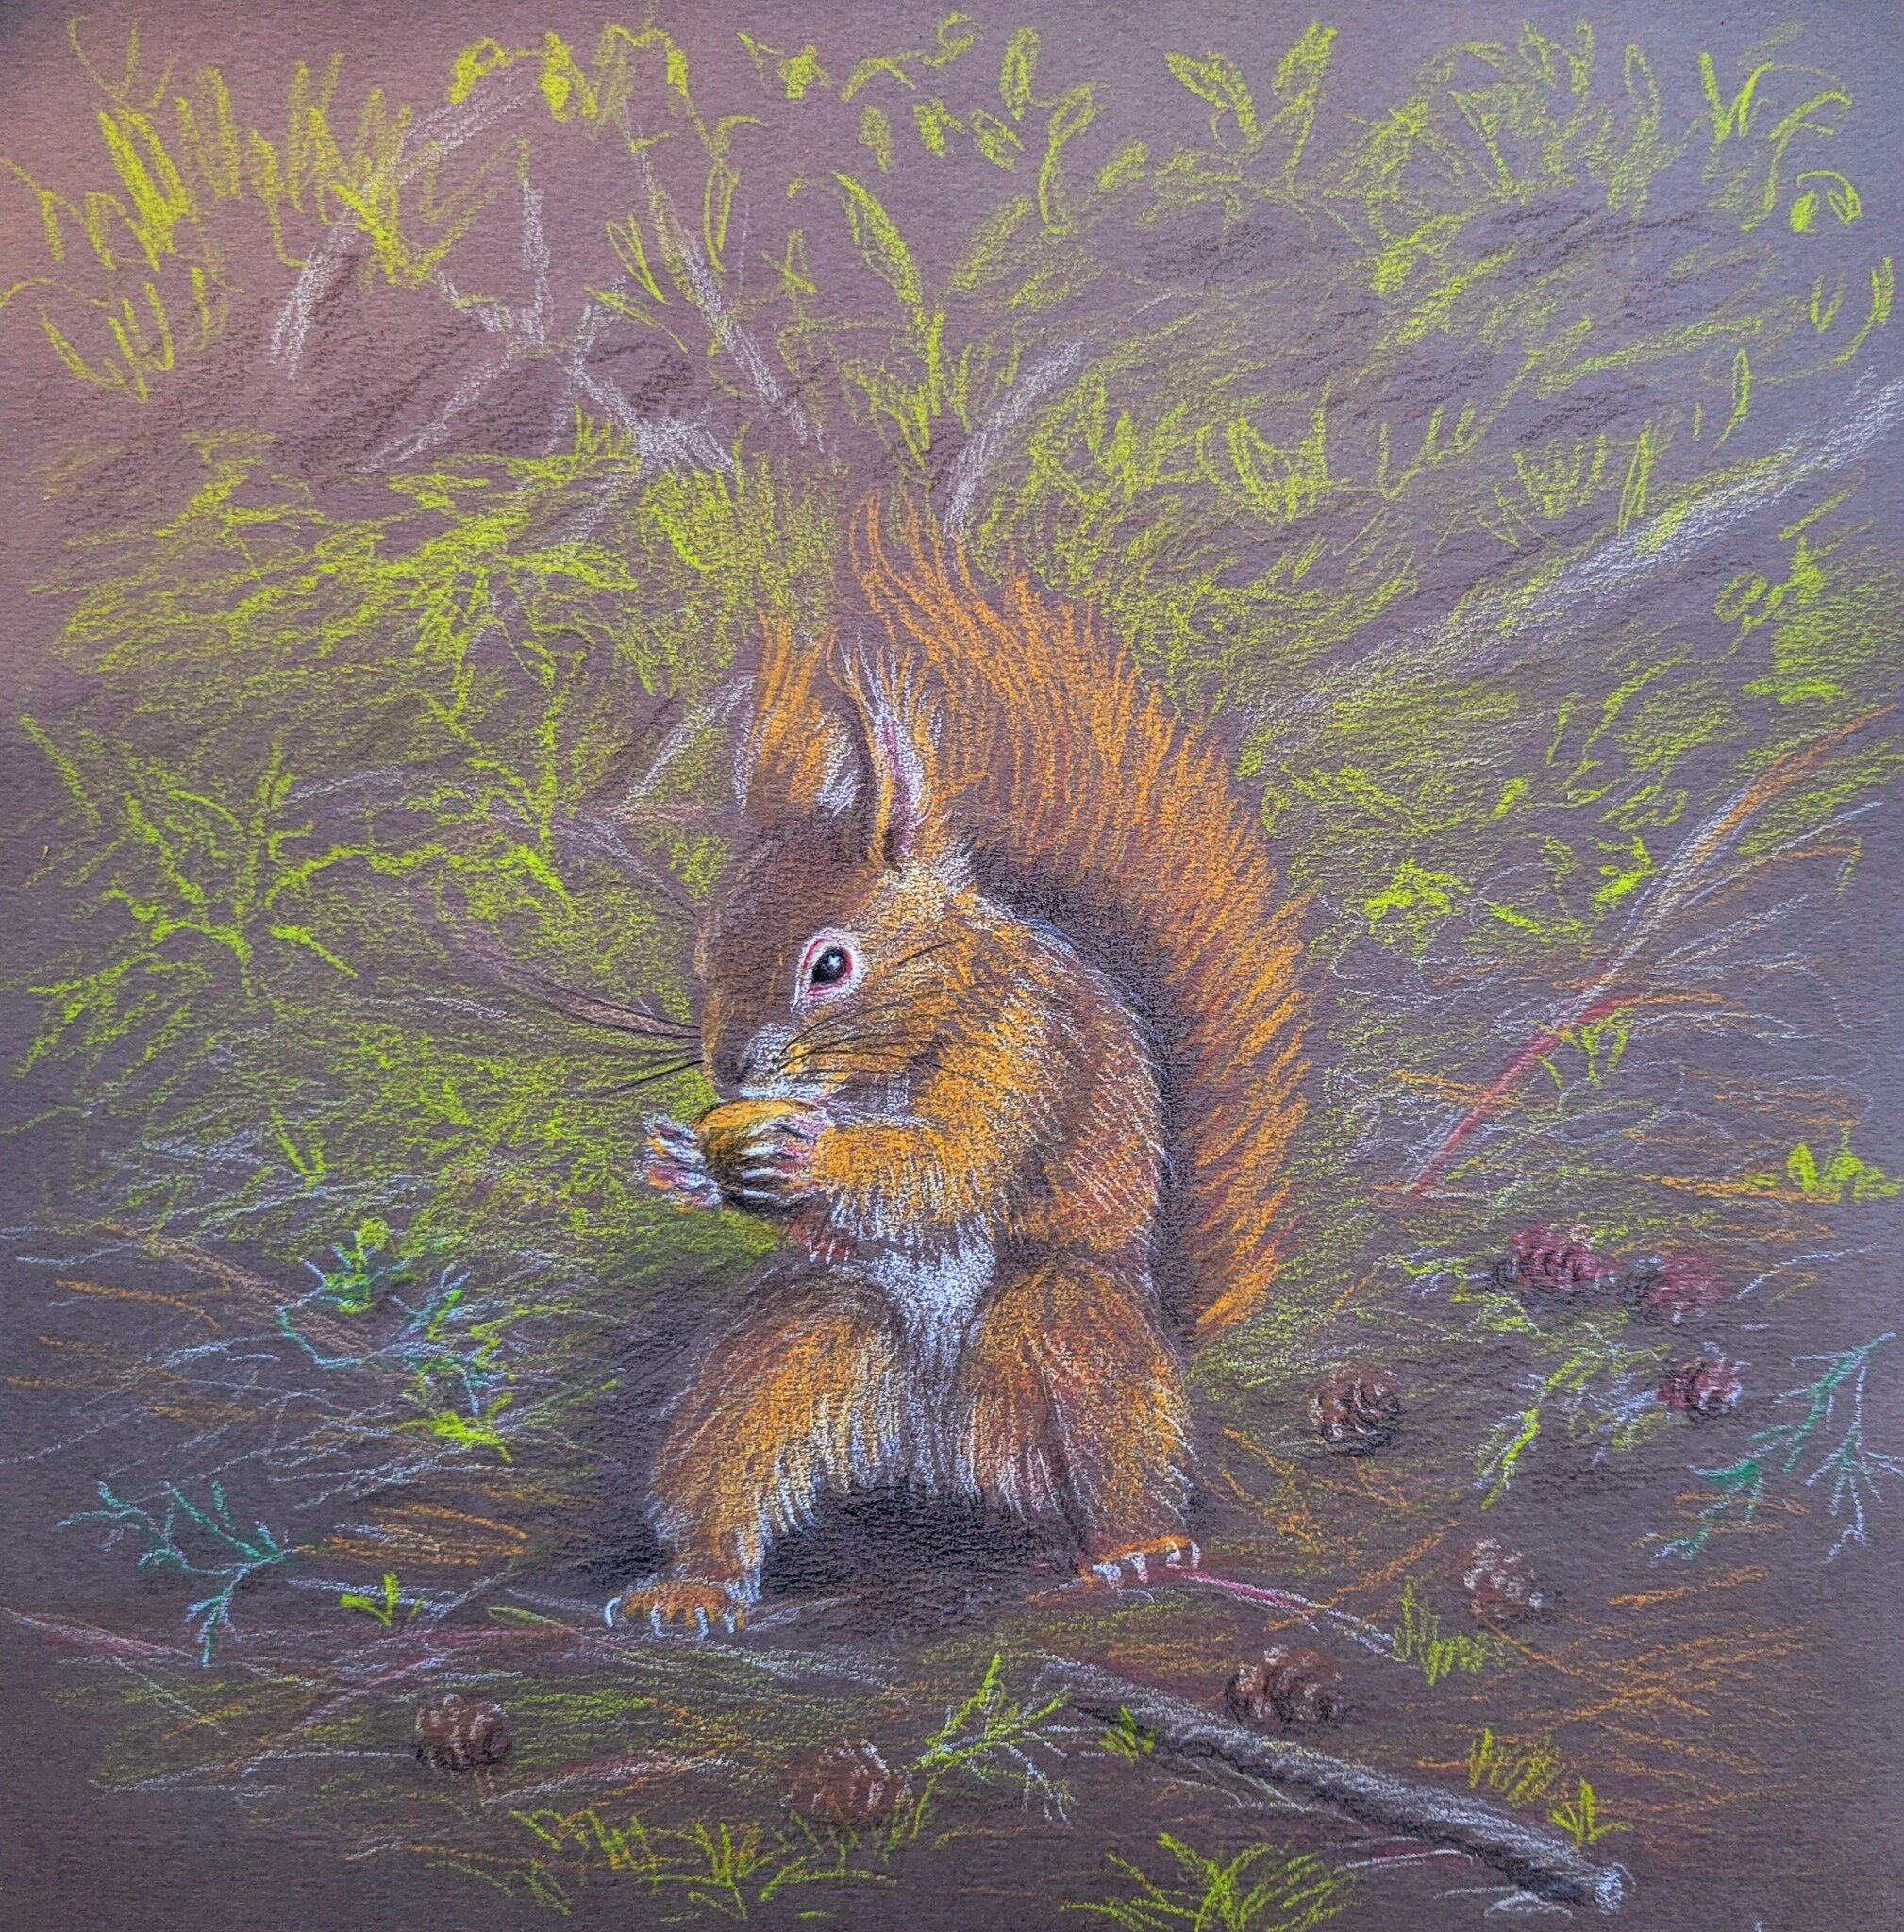 Red Squirrel, 10.5&quot; x 10.5&quot;, colored pencil. #coloredpencil #coloredpencilinstruciton #coloredpencildrawing #drawinginstruction #chicagobotanicgarden #squirrelnutkin #channelingbeatrixpotter